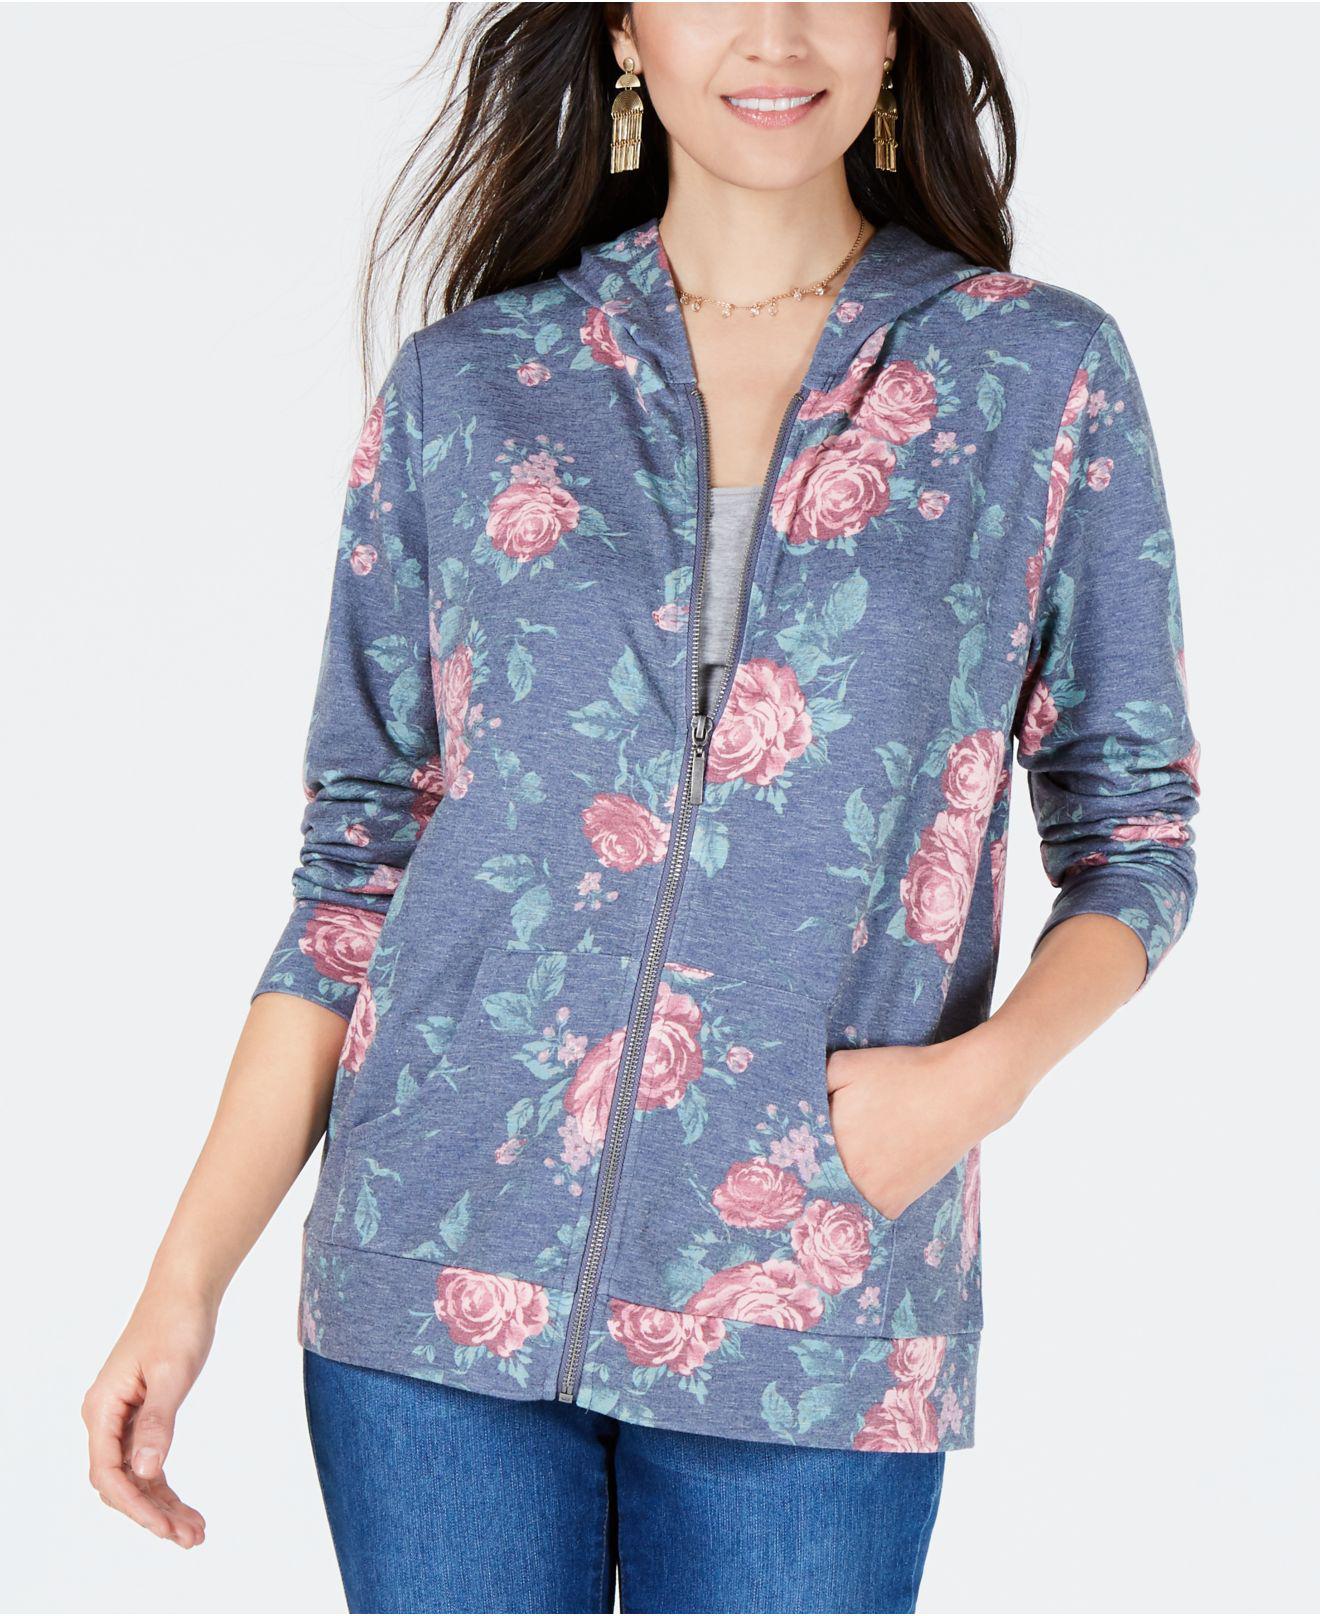 Style Co Synthetic Floral  print Zip  up  Hoodie  Top 